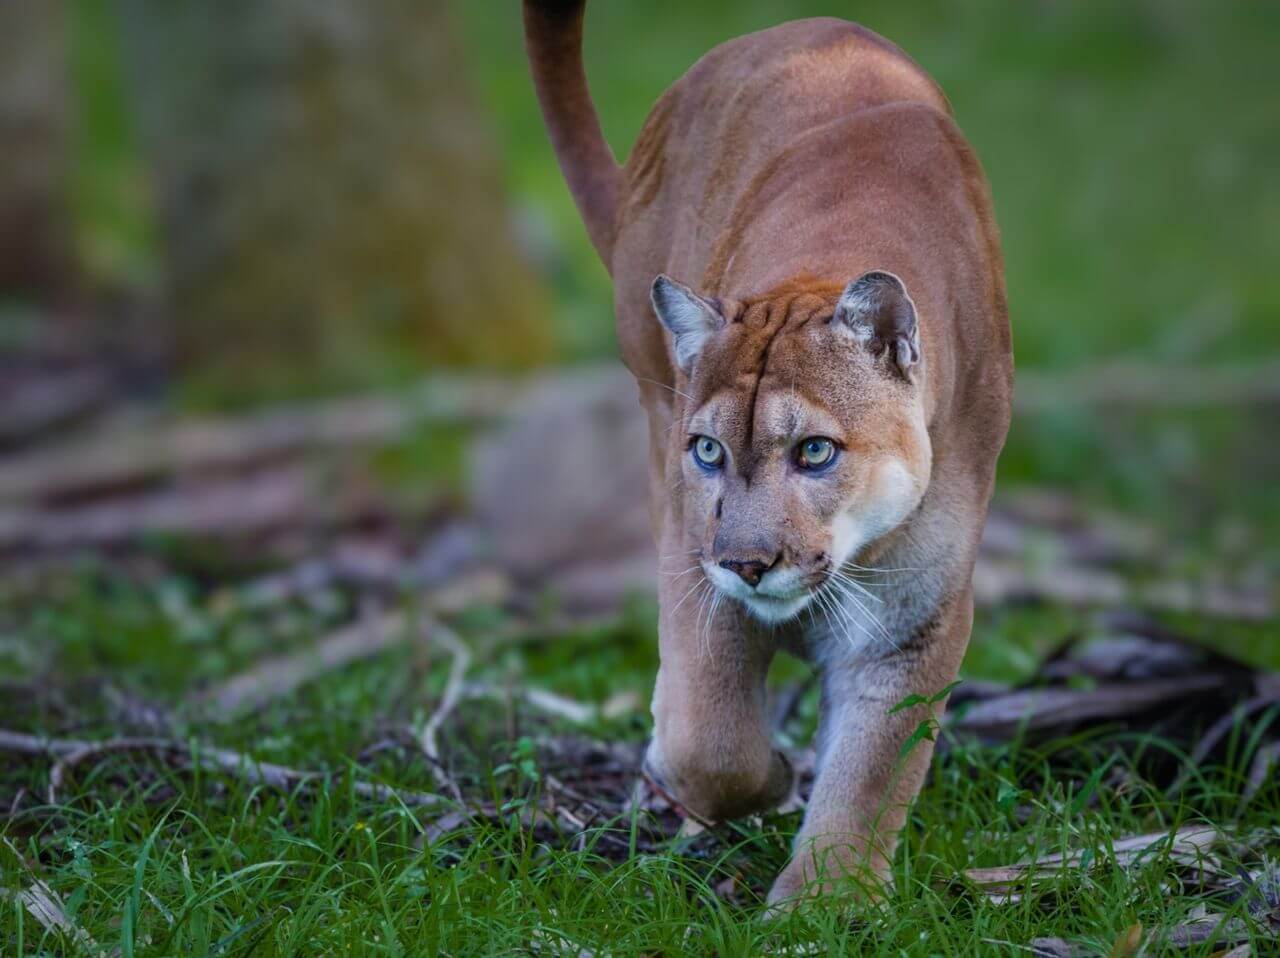 Endangered Panthers suddenly forgot how to walk. What happens to them?